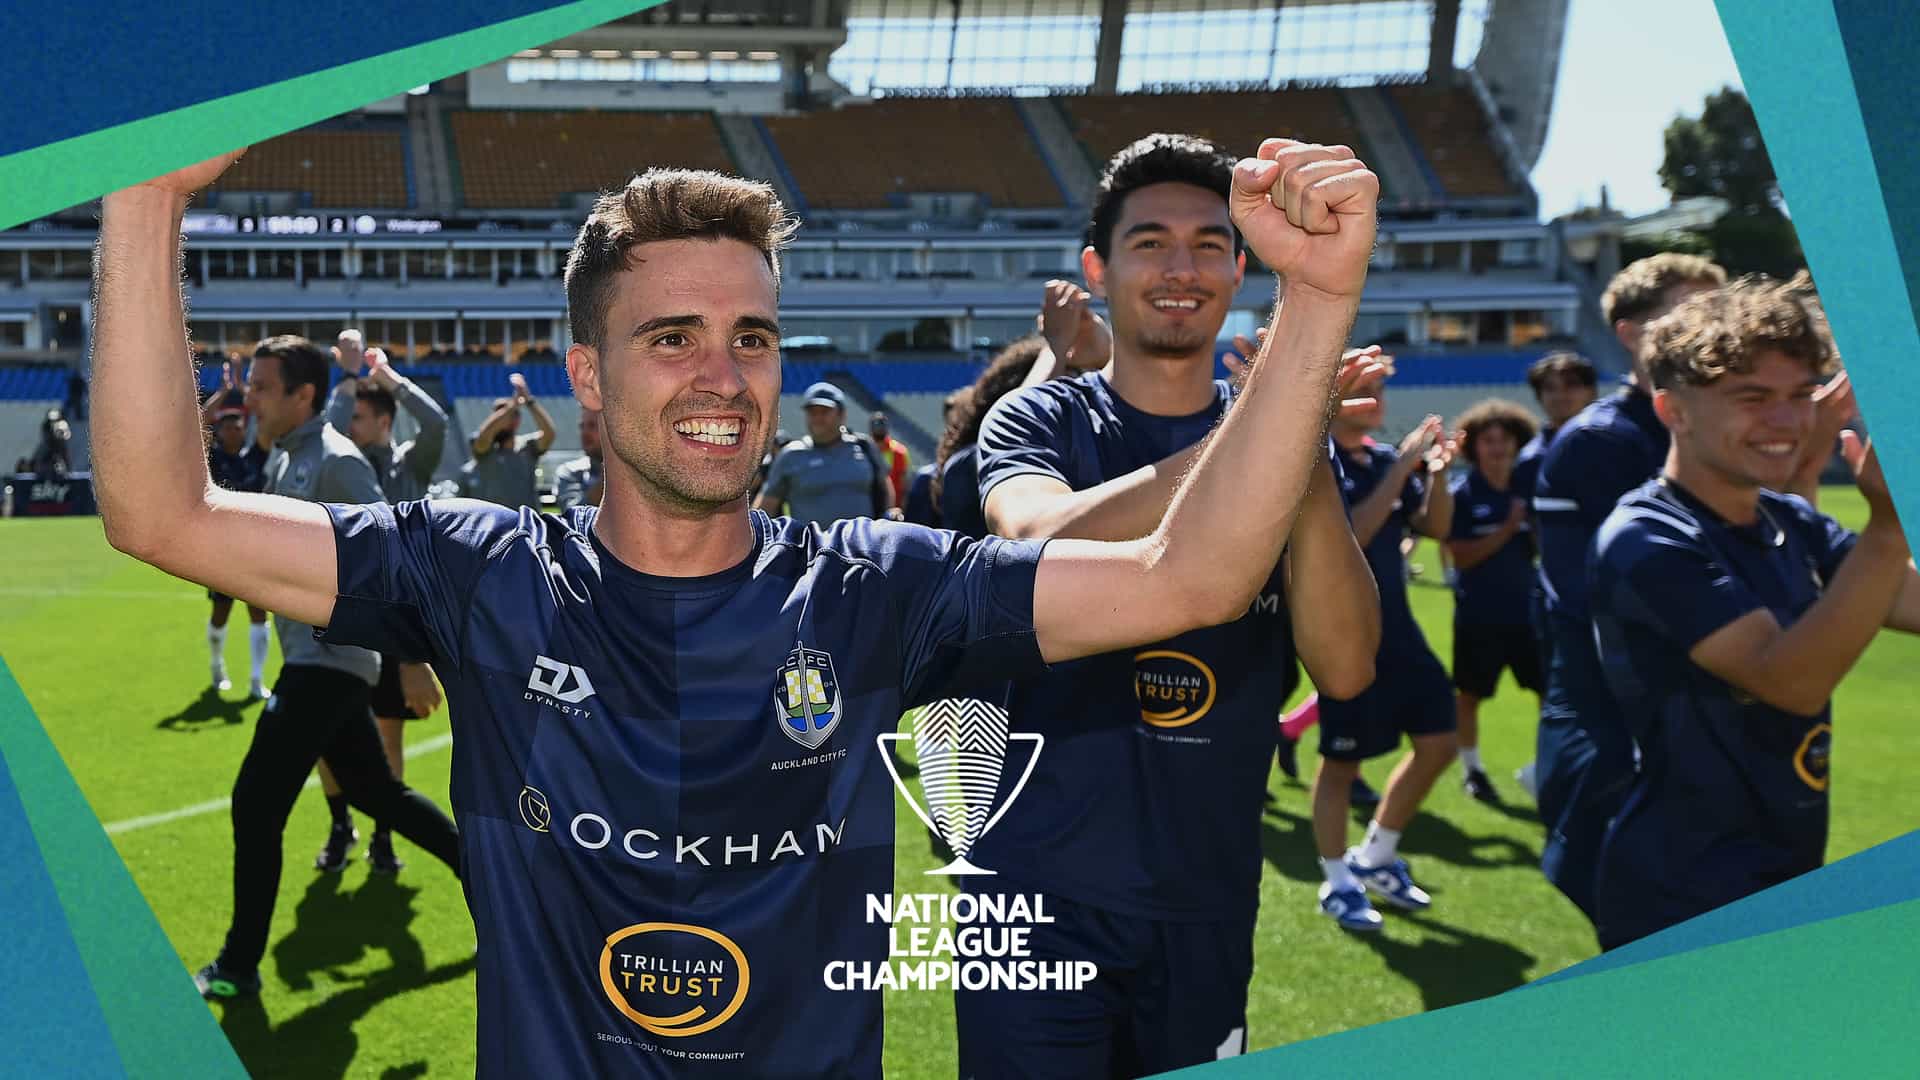 Auckland City FC win National League Championship Grand Final to claim 4th  title of the season